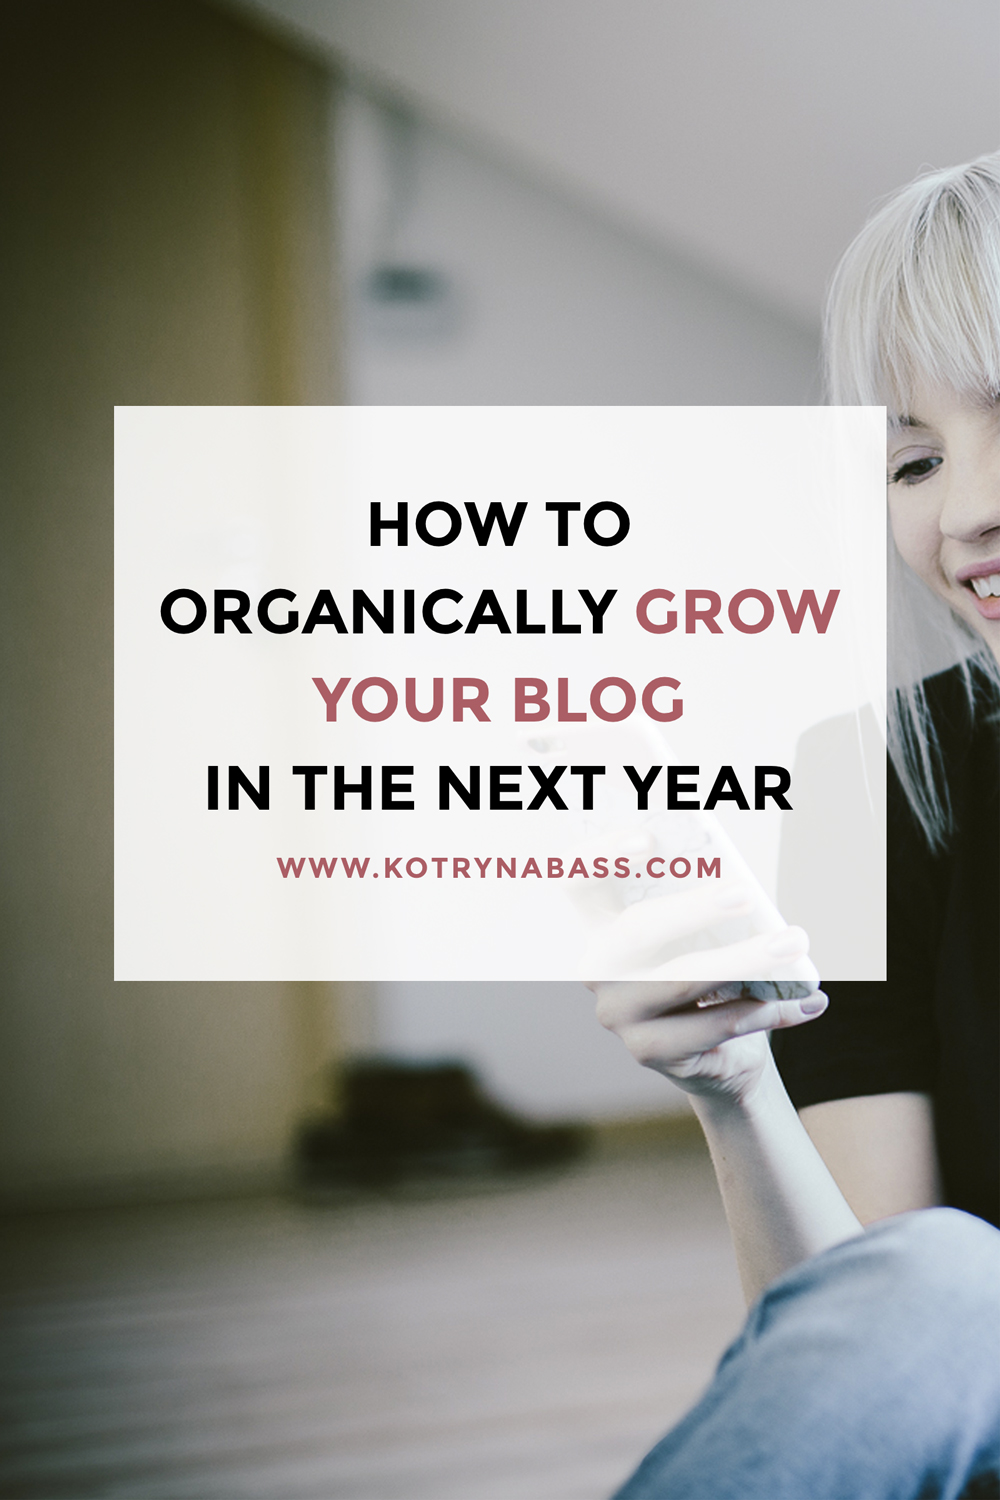 How To Organically Grow Your Blog In the Next Year